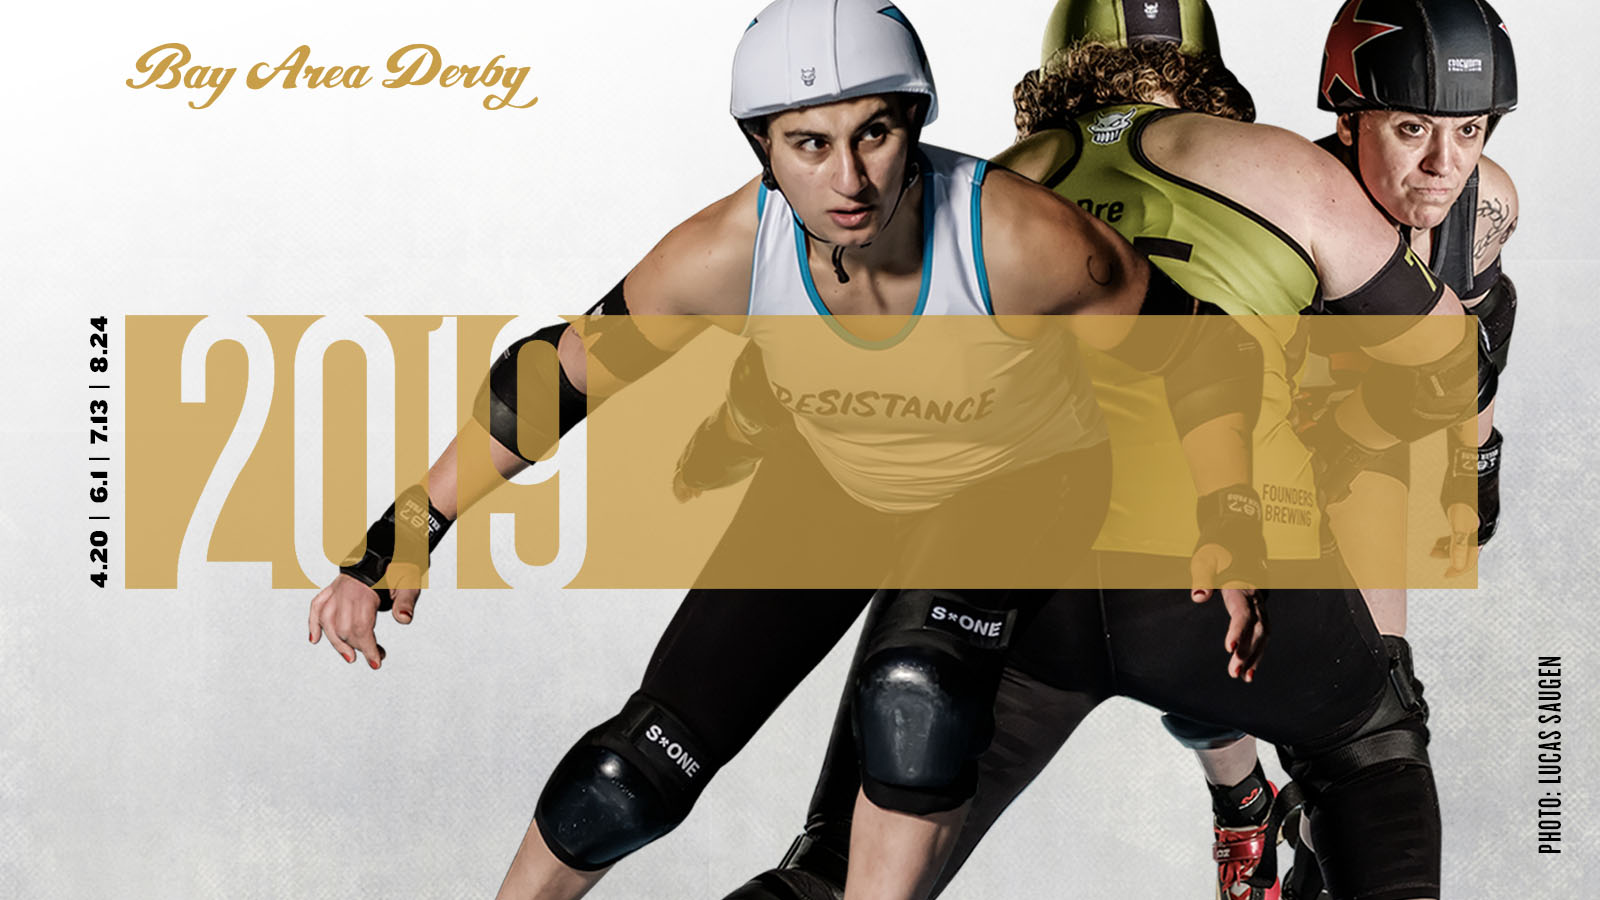 2019 Oakland Outlaws Team Preview - Bay Area Derby